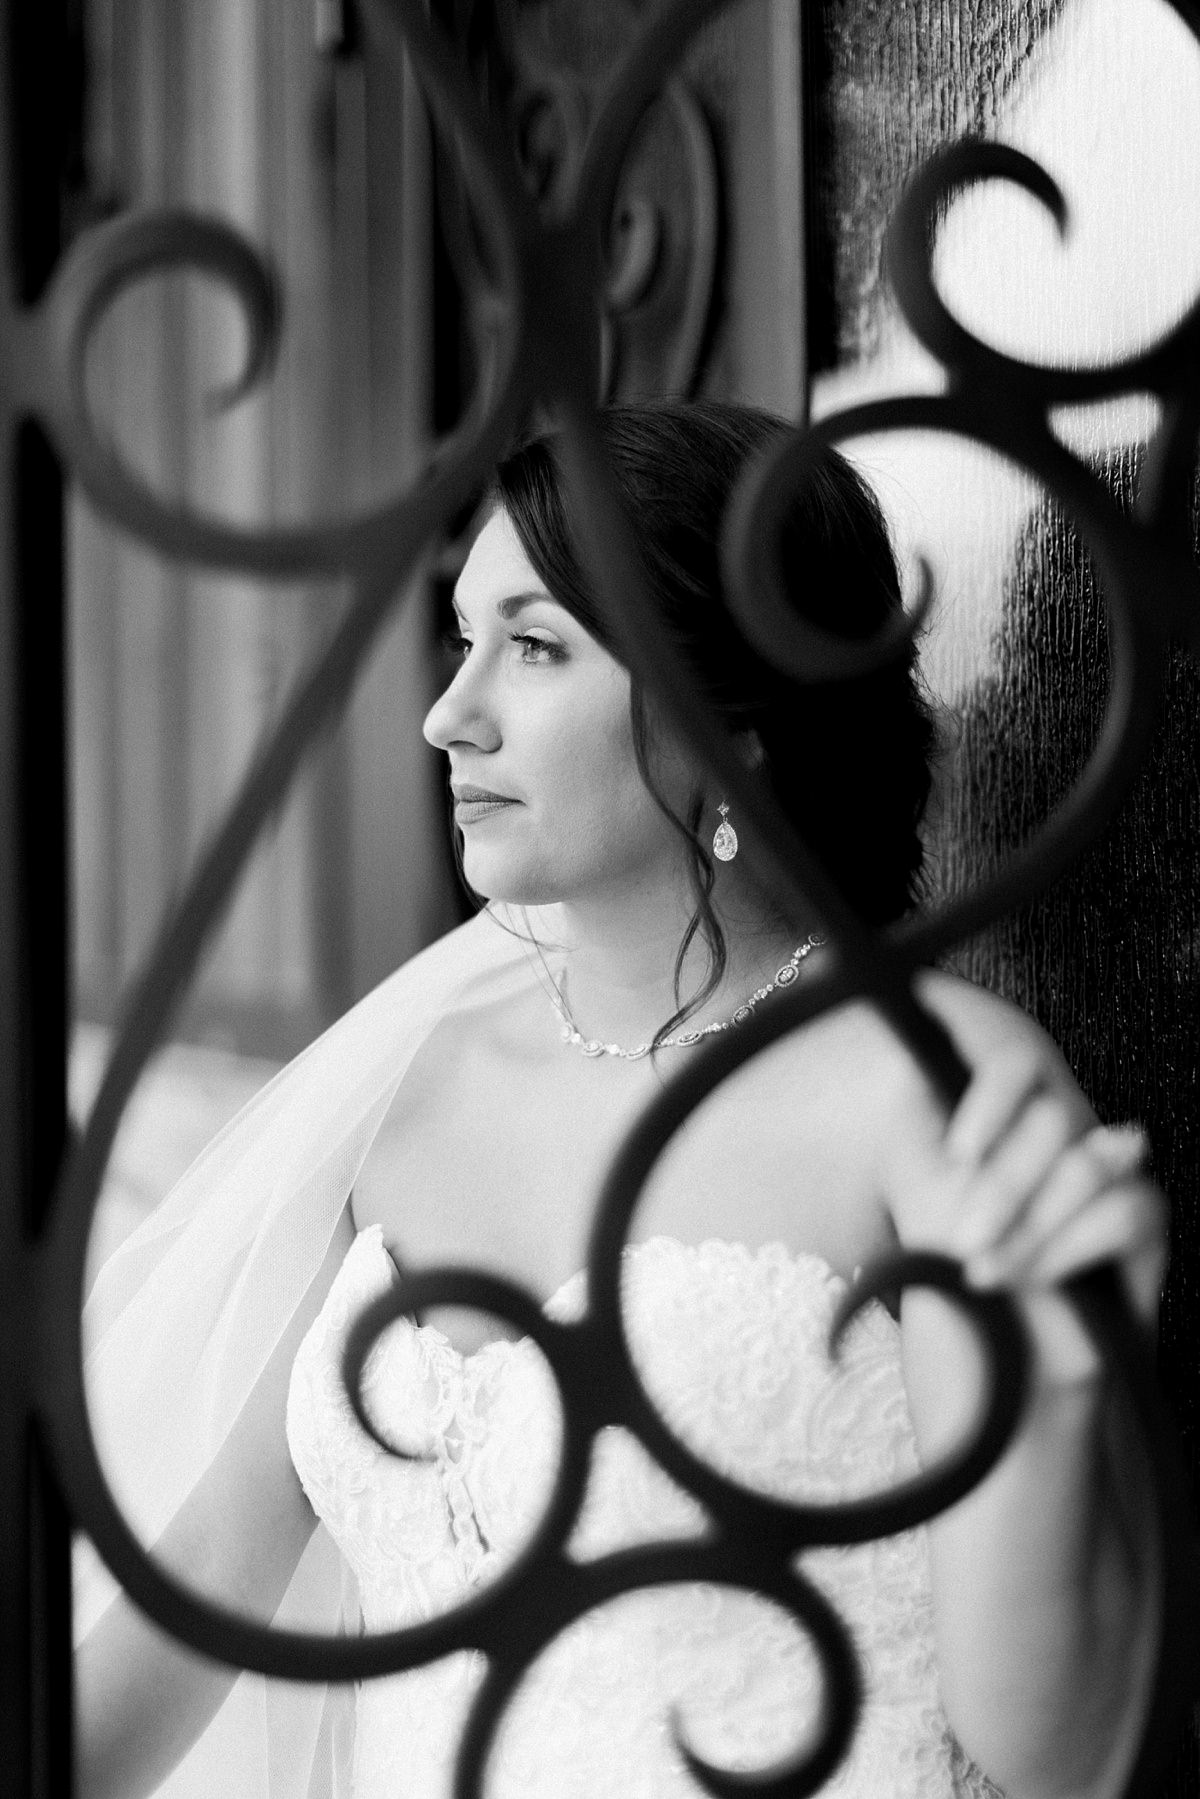 Nicole Bridal Portraits | The Springs in Weatherford, Fort Worth Wedding Photographer, DFW Bride, Weatherford, Texas Wedding, DFW Photographer_0036